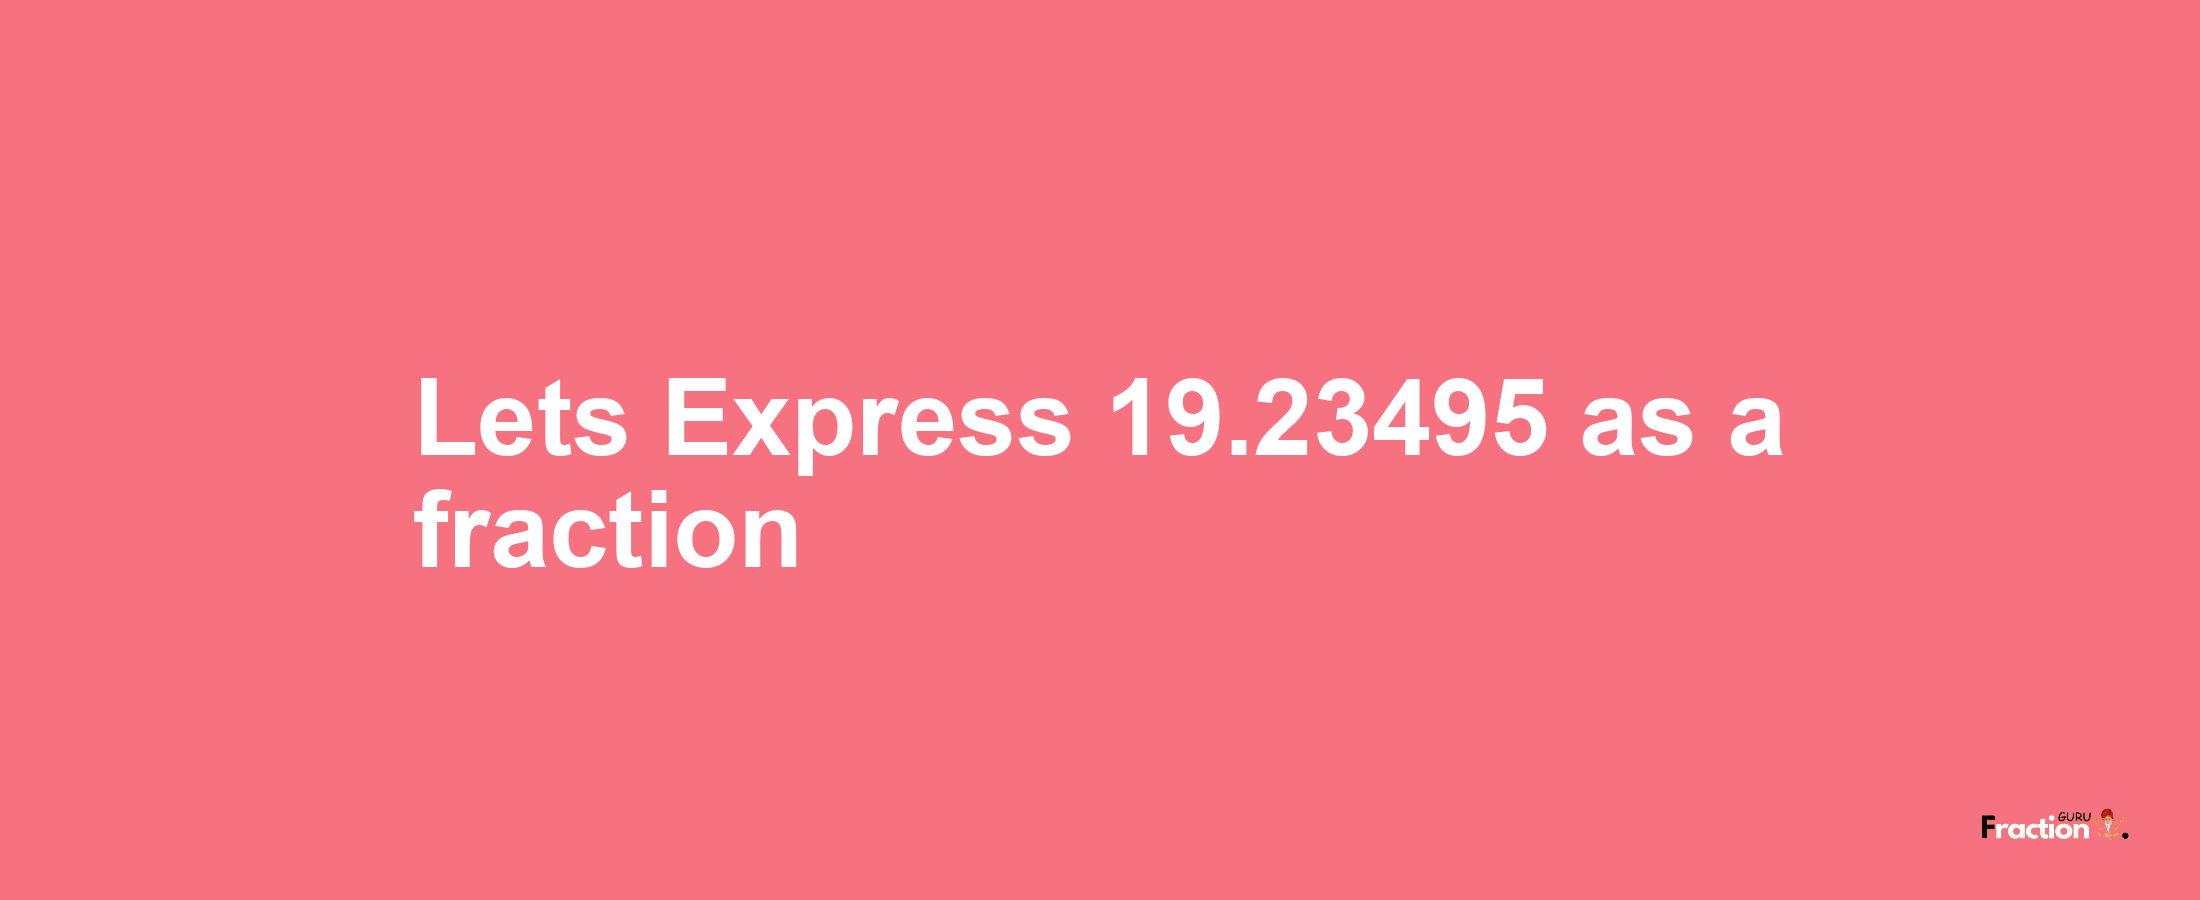 Lets Express 19.23495 as afraction